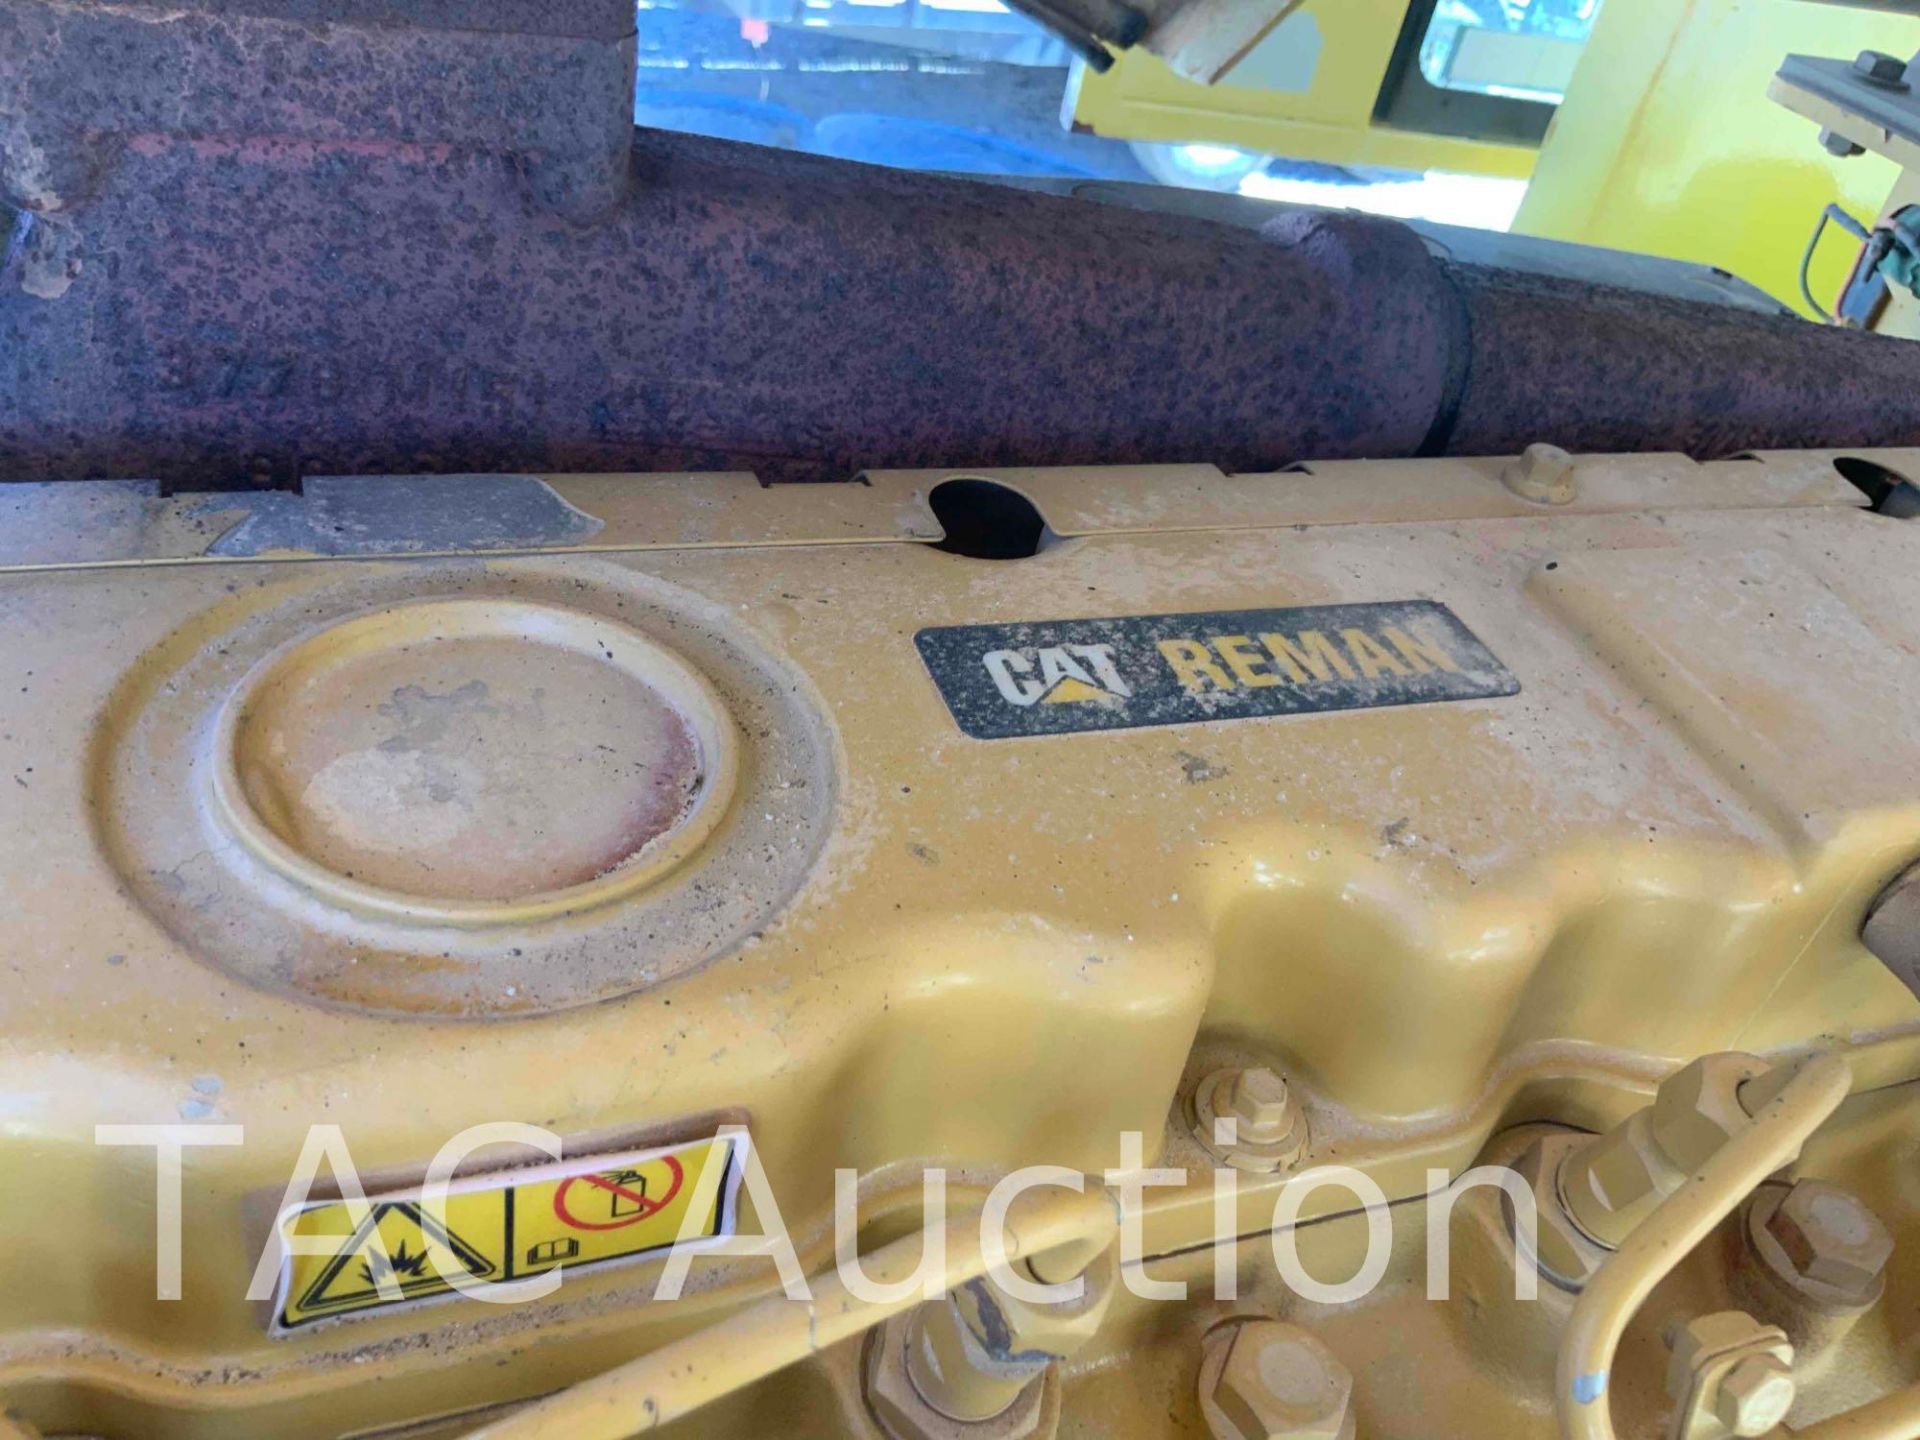 2004 Caterpillar CP-563E Padfoot Vibratory Compactor Roller - Image 41 of 51